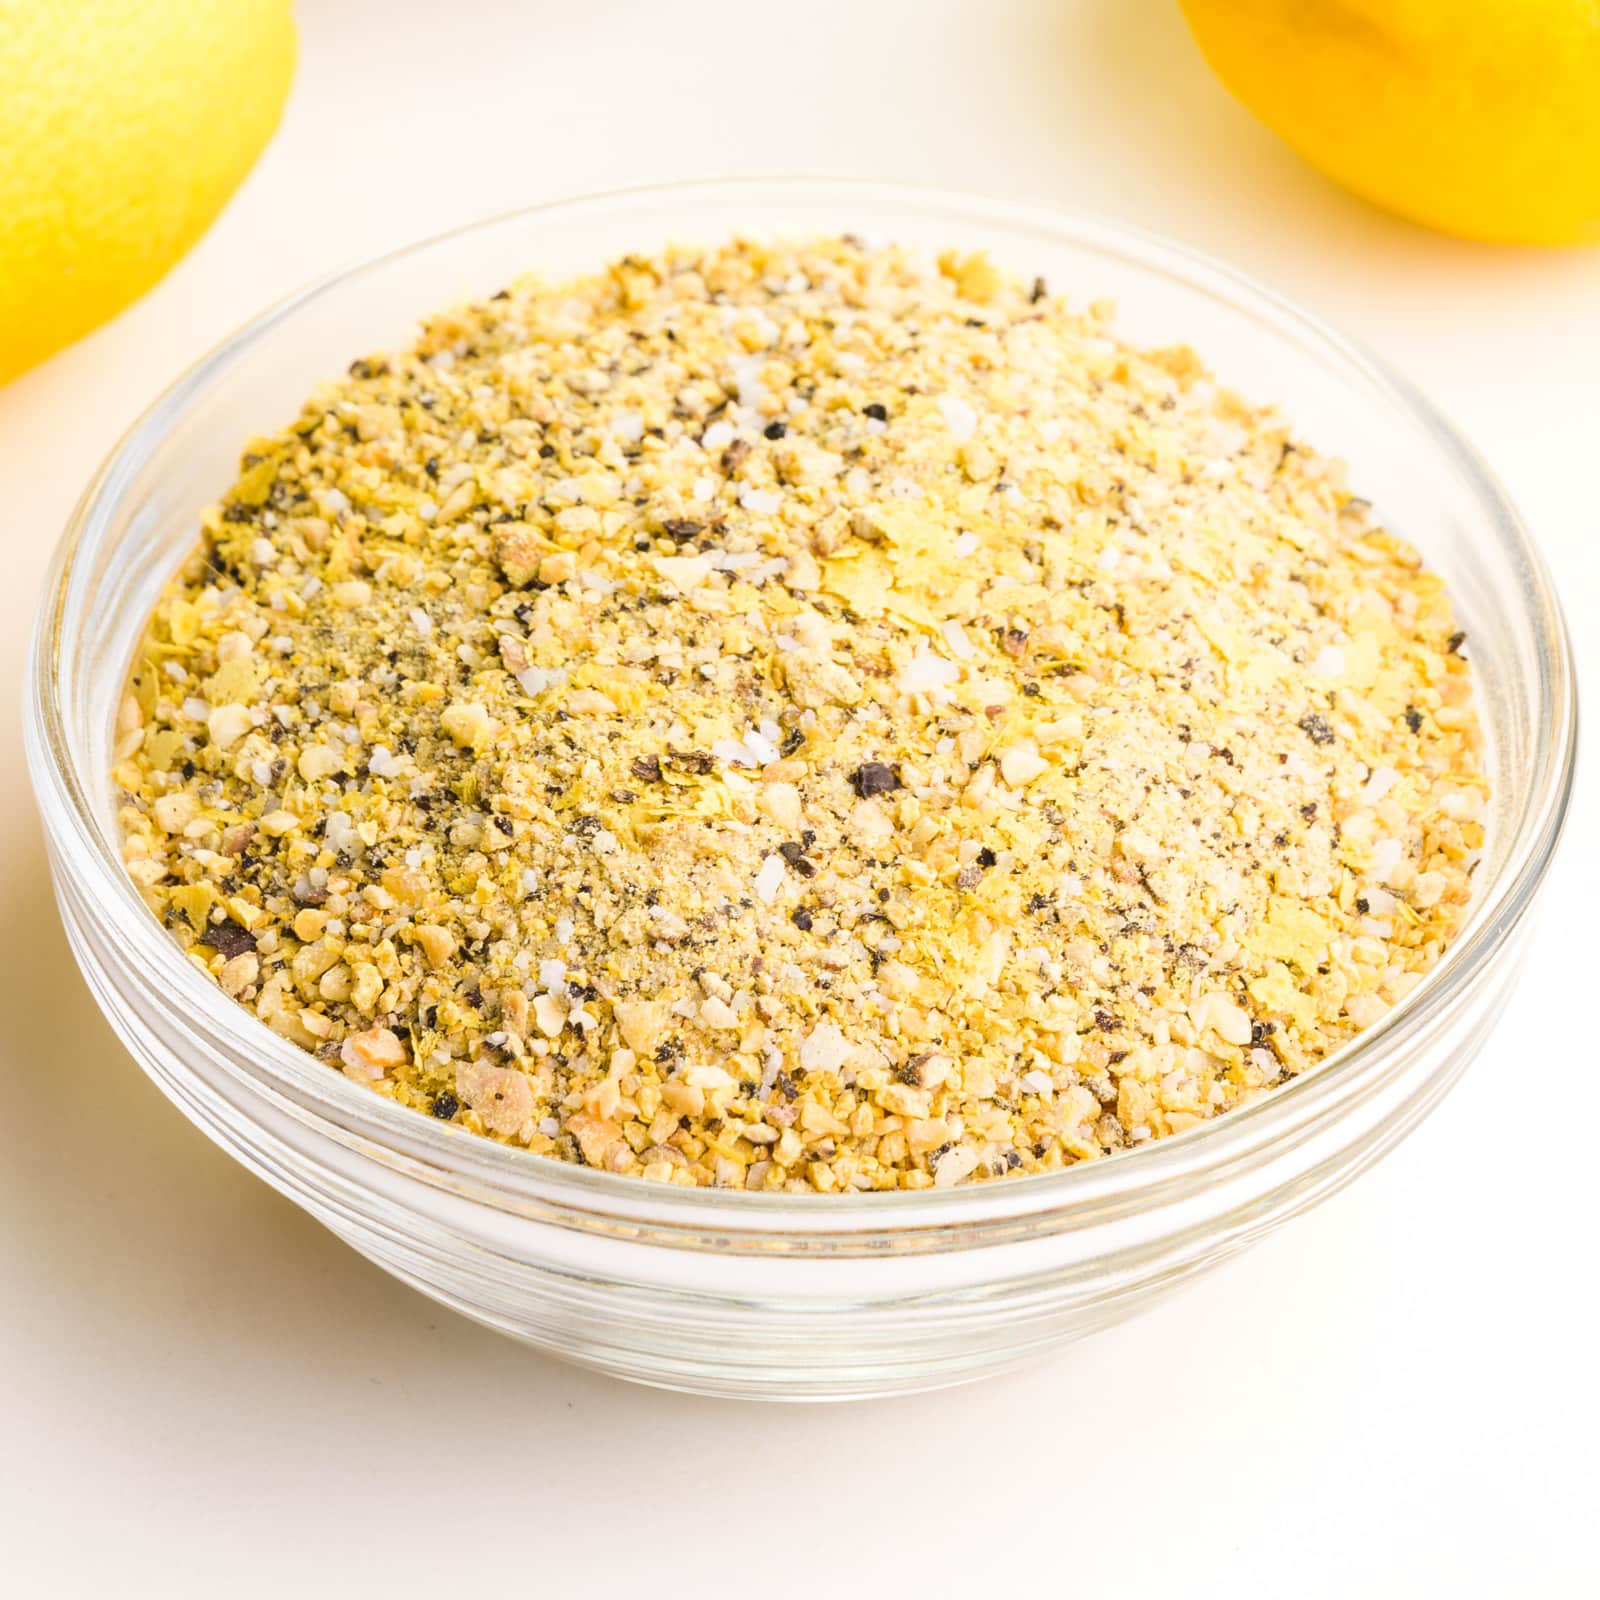 Lemon Pepper Seasoning - Made with only Five Ingredients! - Namely